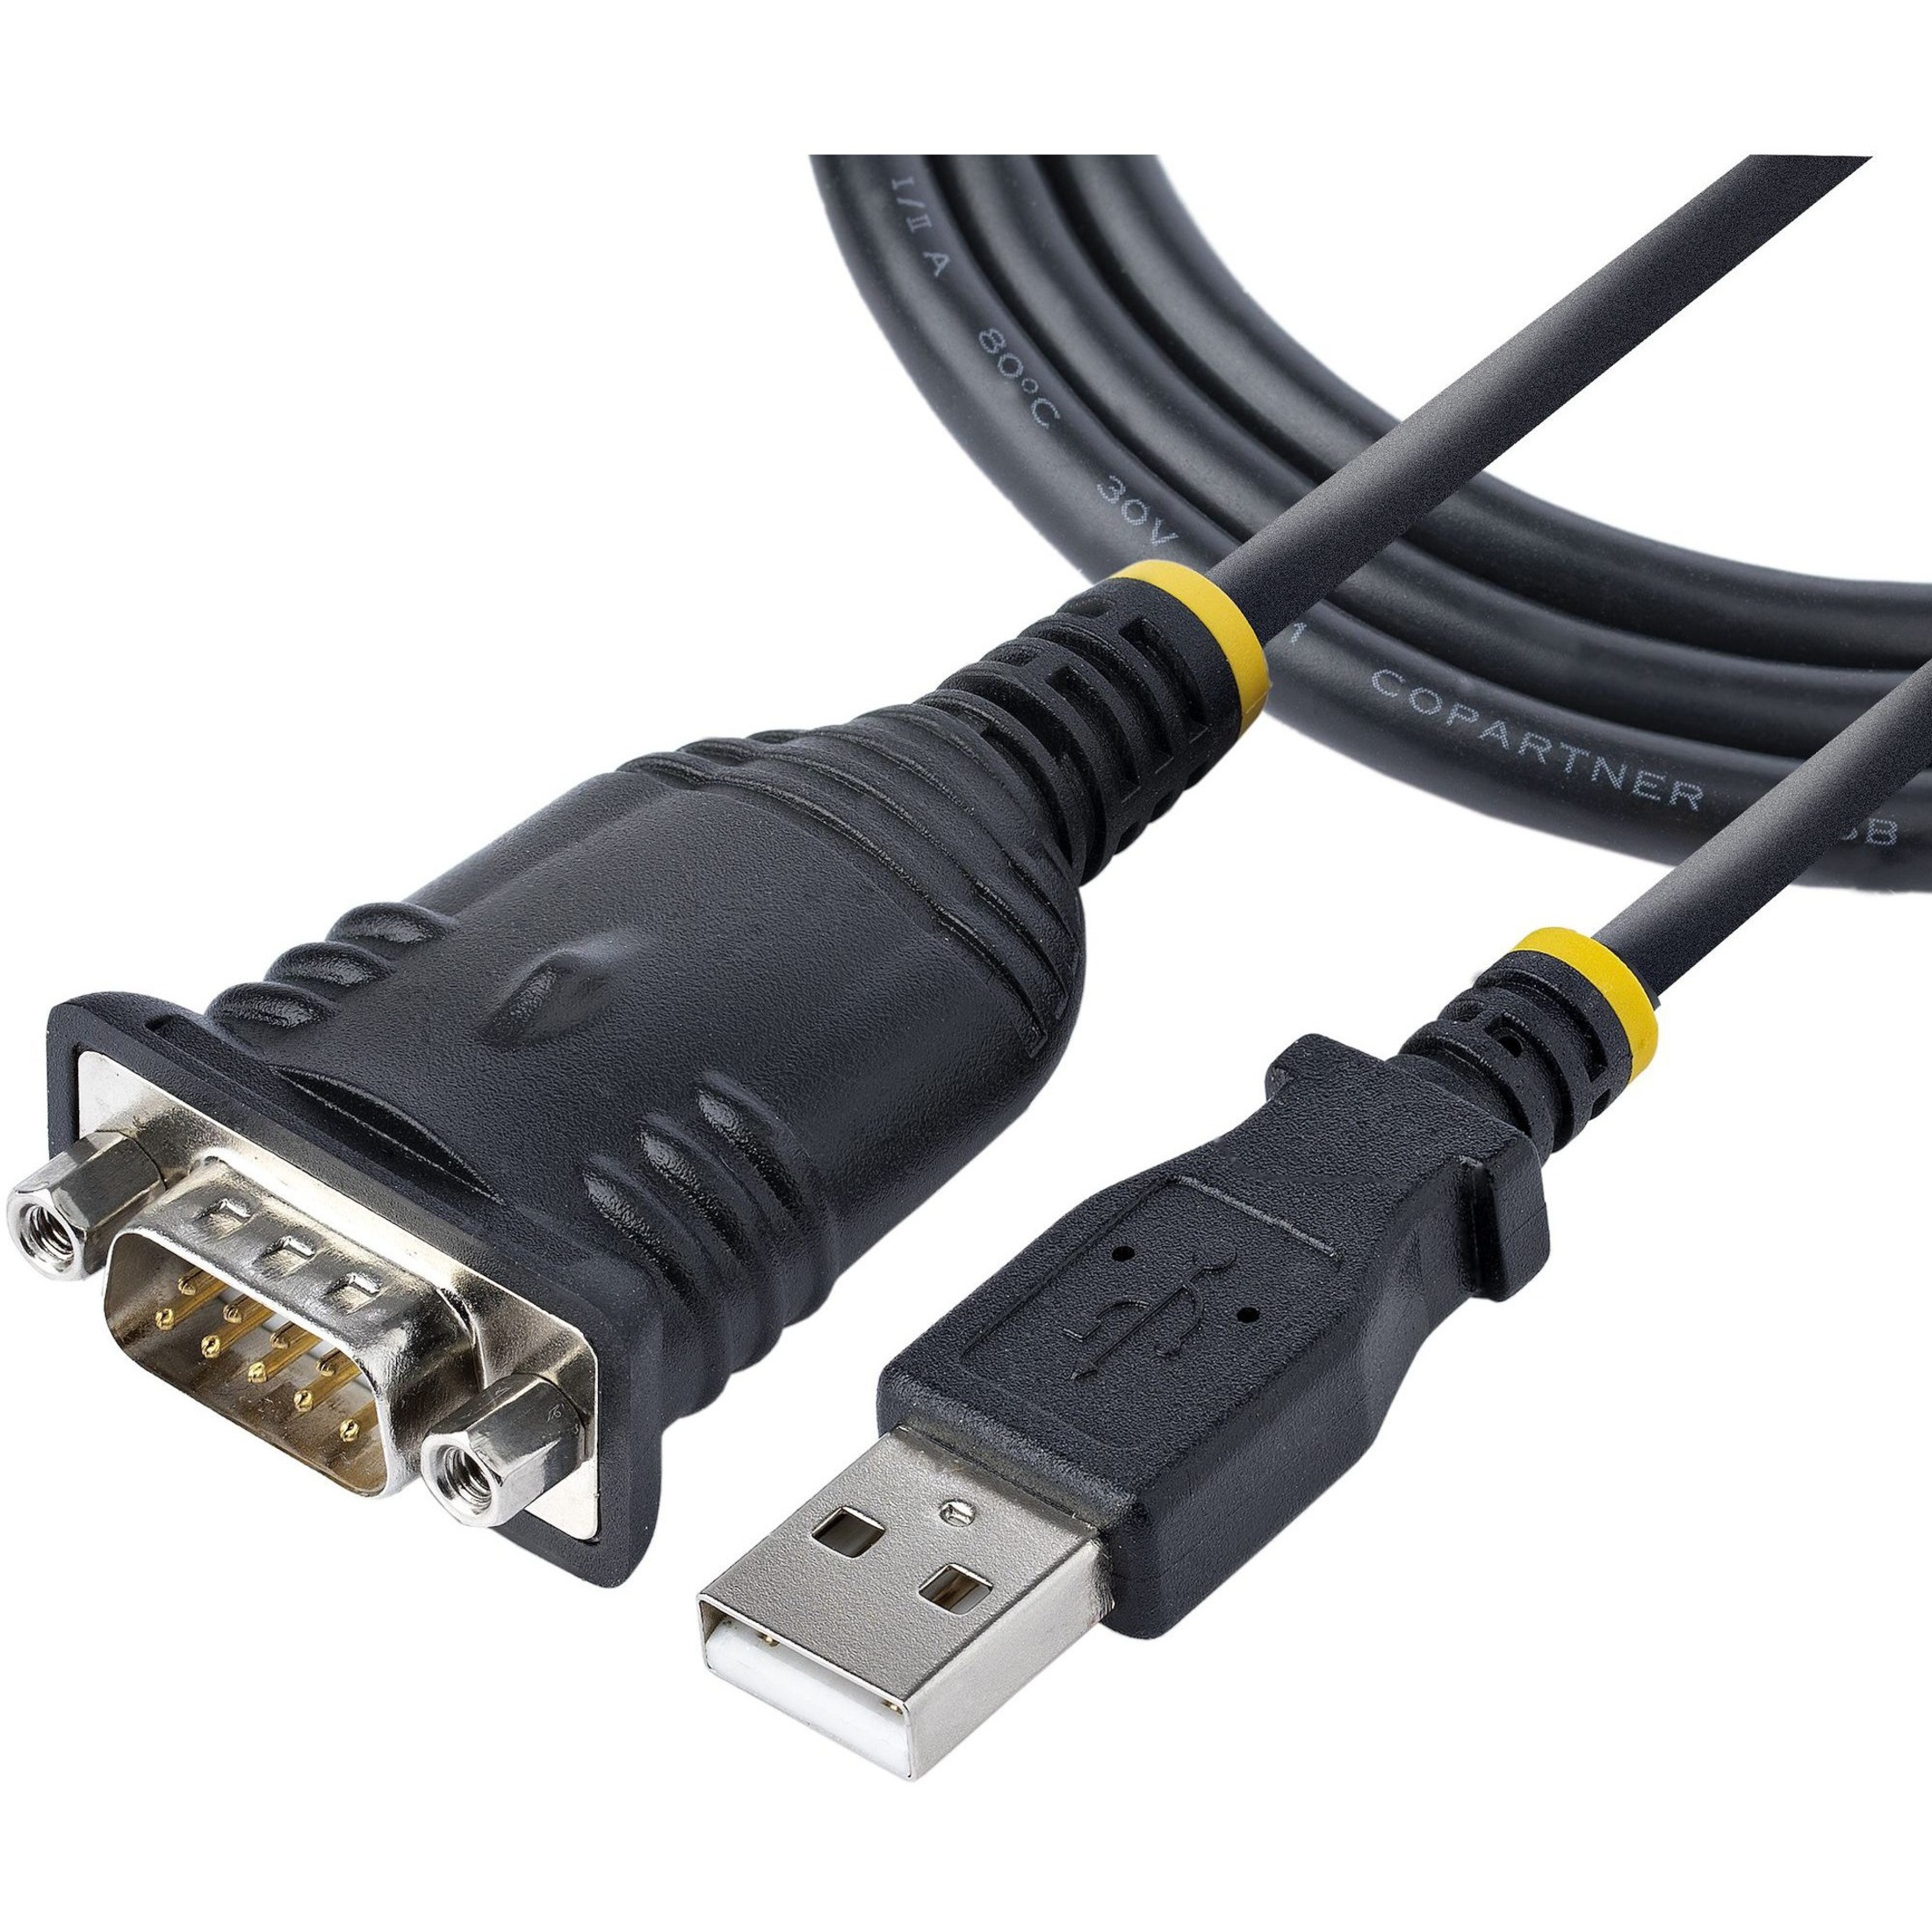 .com (1m) USB to Serial Cable, DB9 Male RS232 to USB Converter, USB to Serial Adapter, COM Port Adapter with Prolific IC -... 1P3FP-USB- SERIAL - Corporate Armor